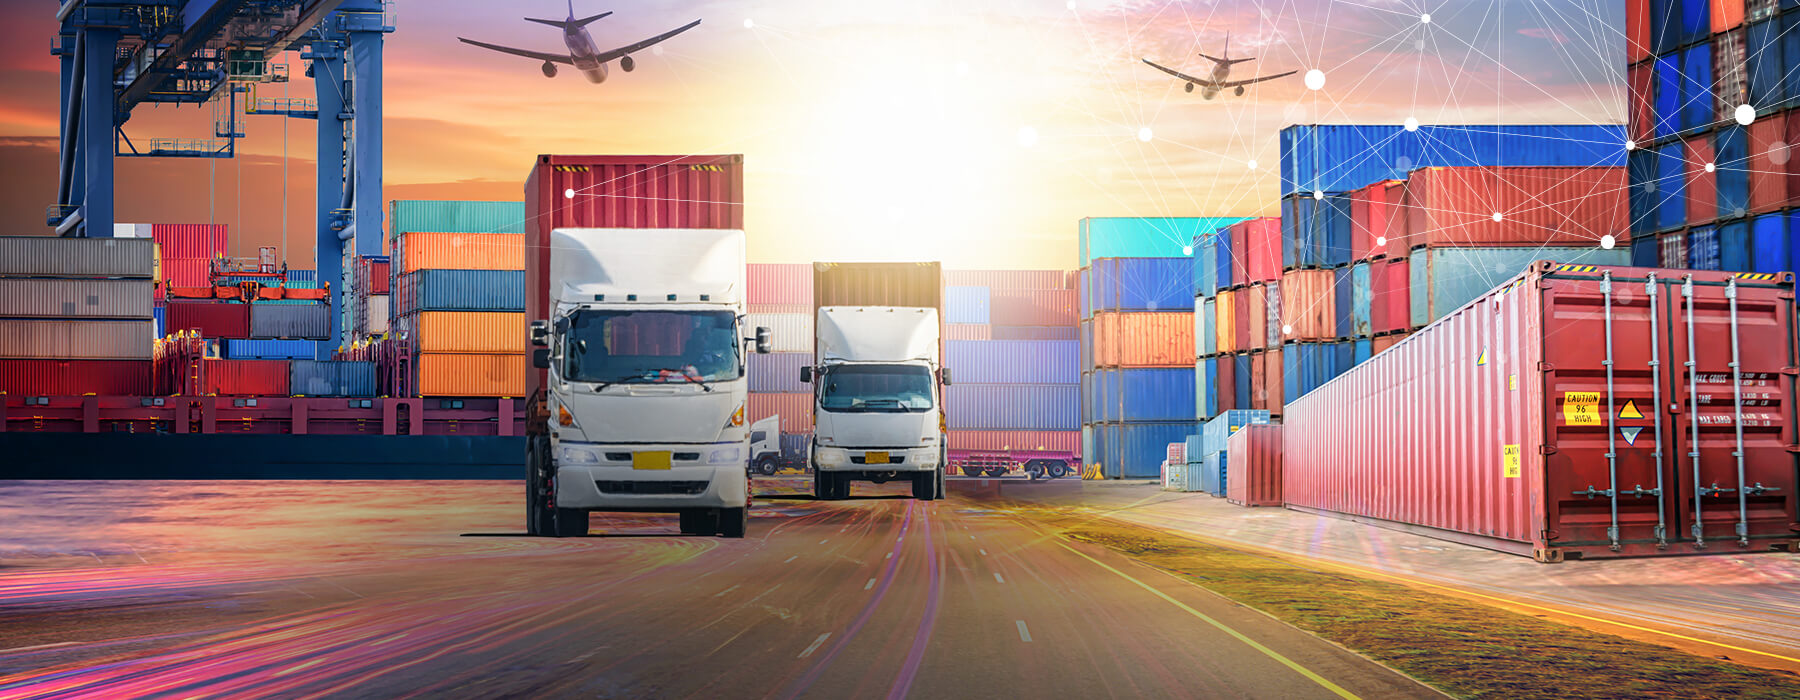 Automated Freight Industry